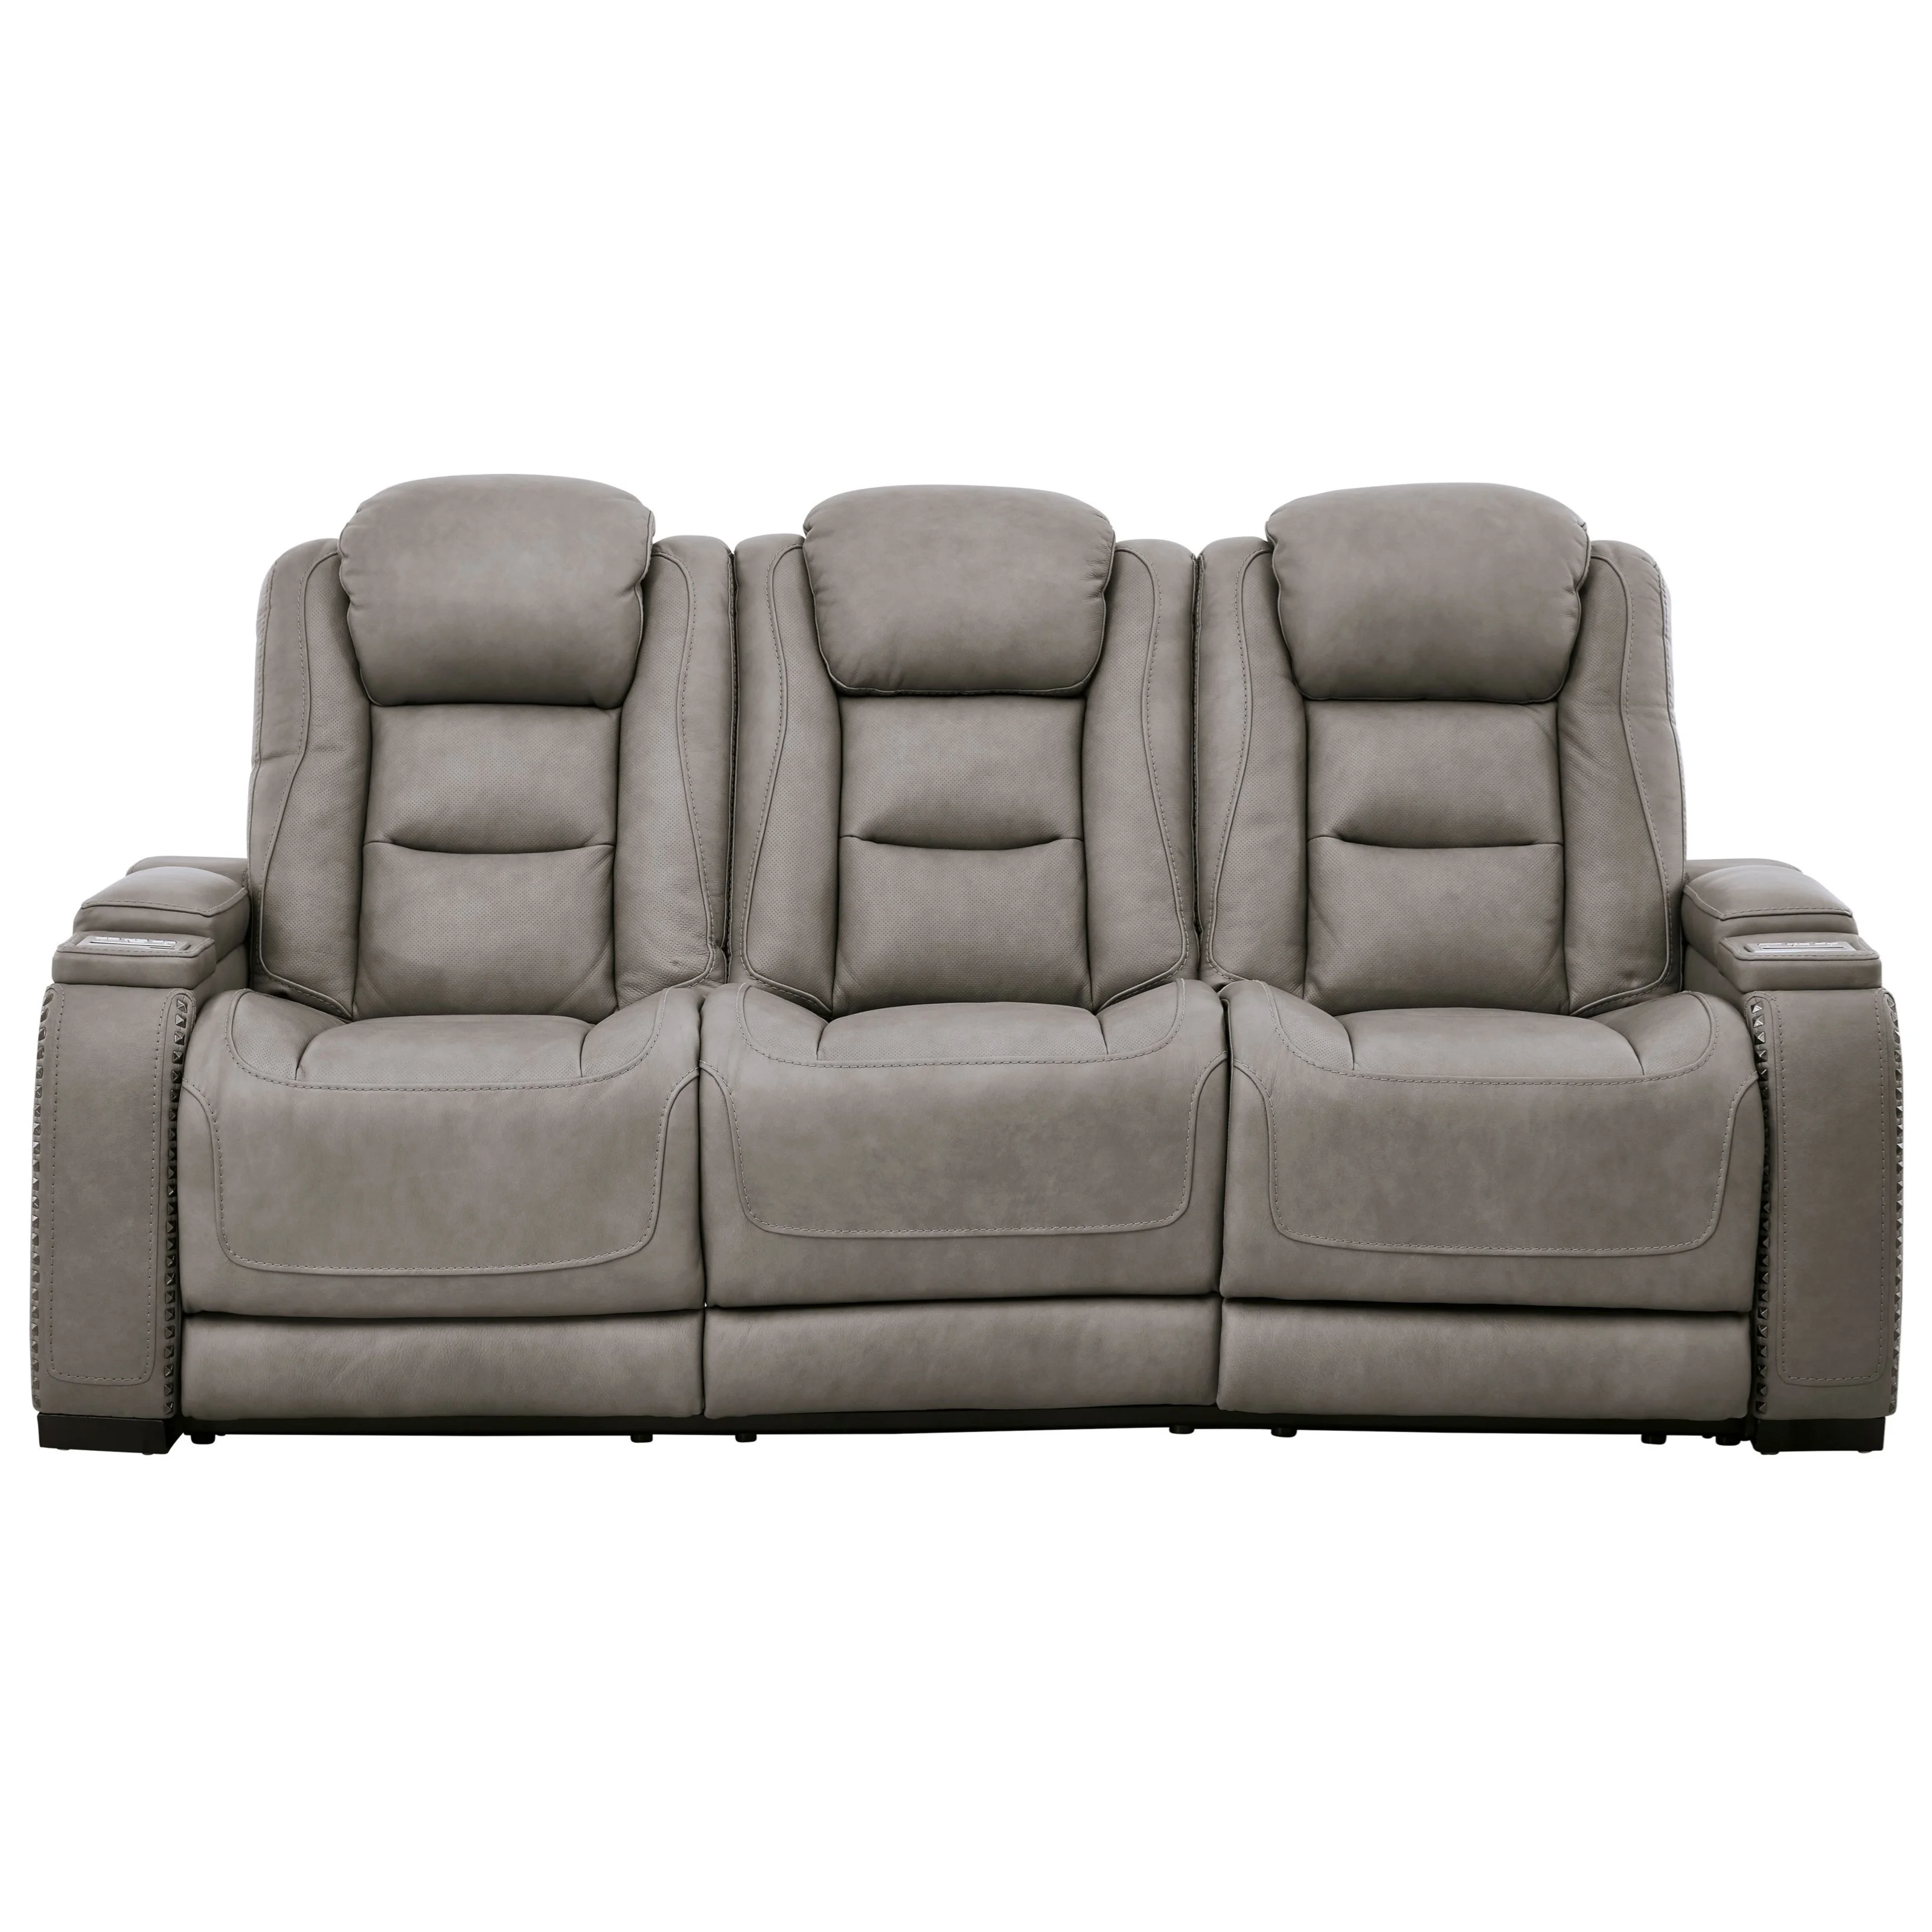 Signature Design by Ashley The Man-Den U8530613 Contemporary Power Recliner  with Adjustable Headrest and Lumbar Support, Zak's Home Outlet